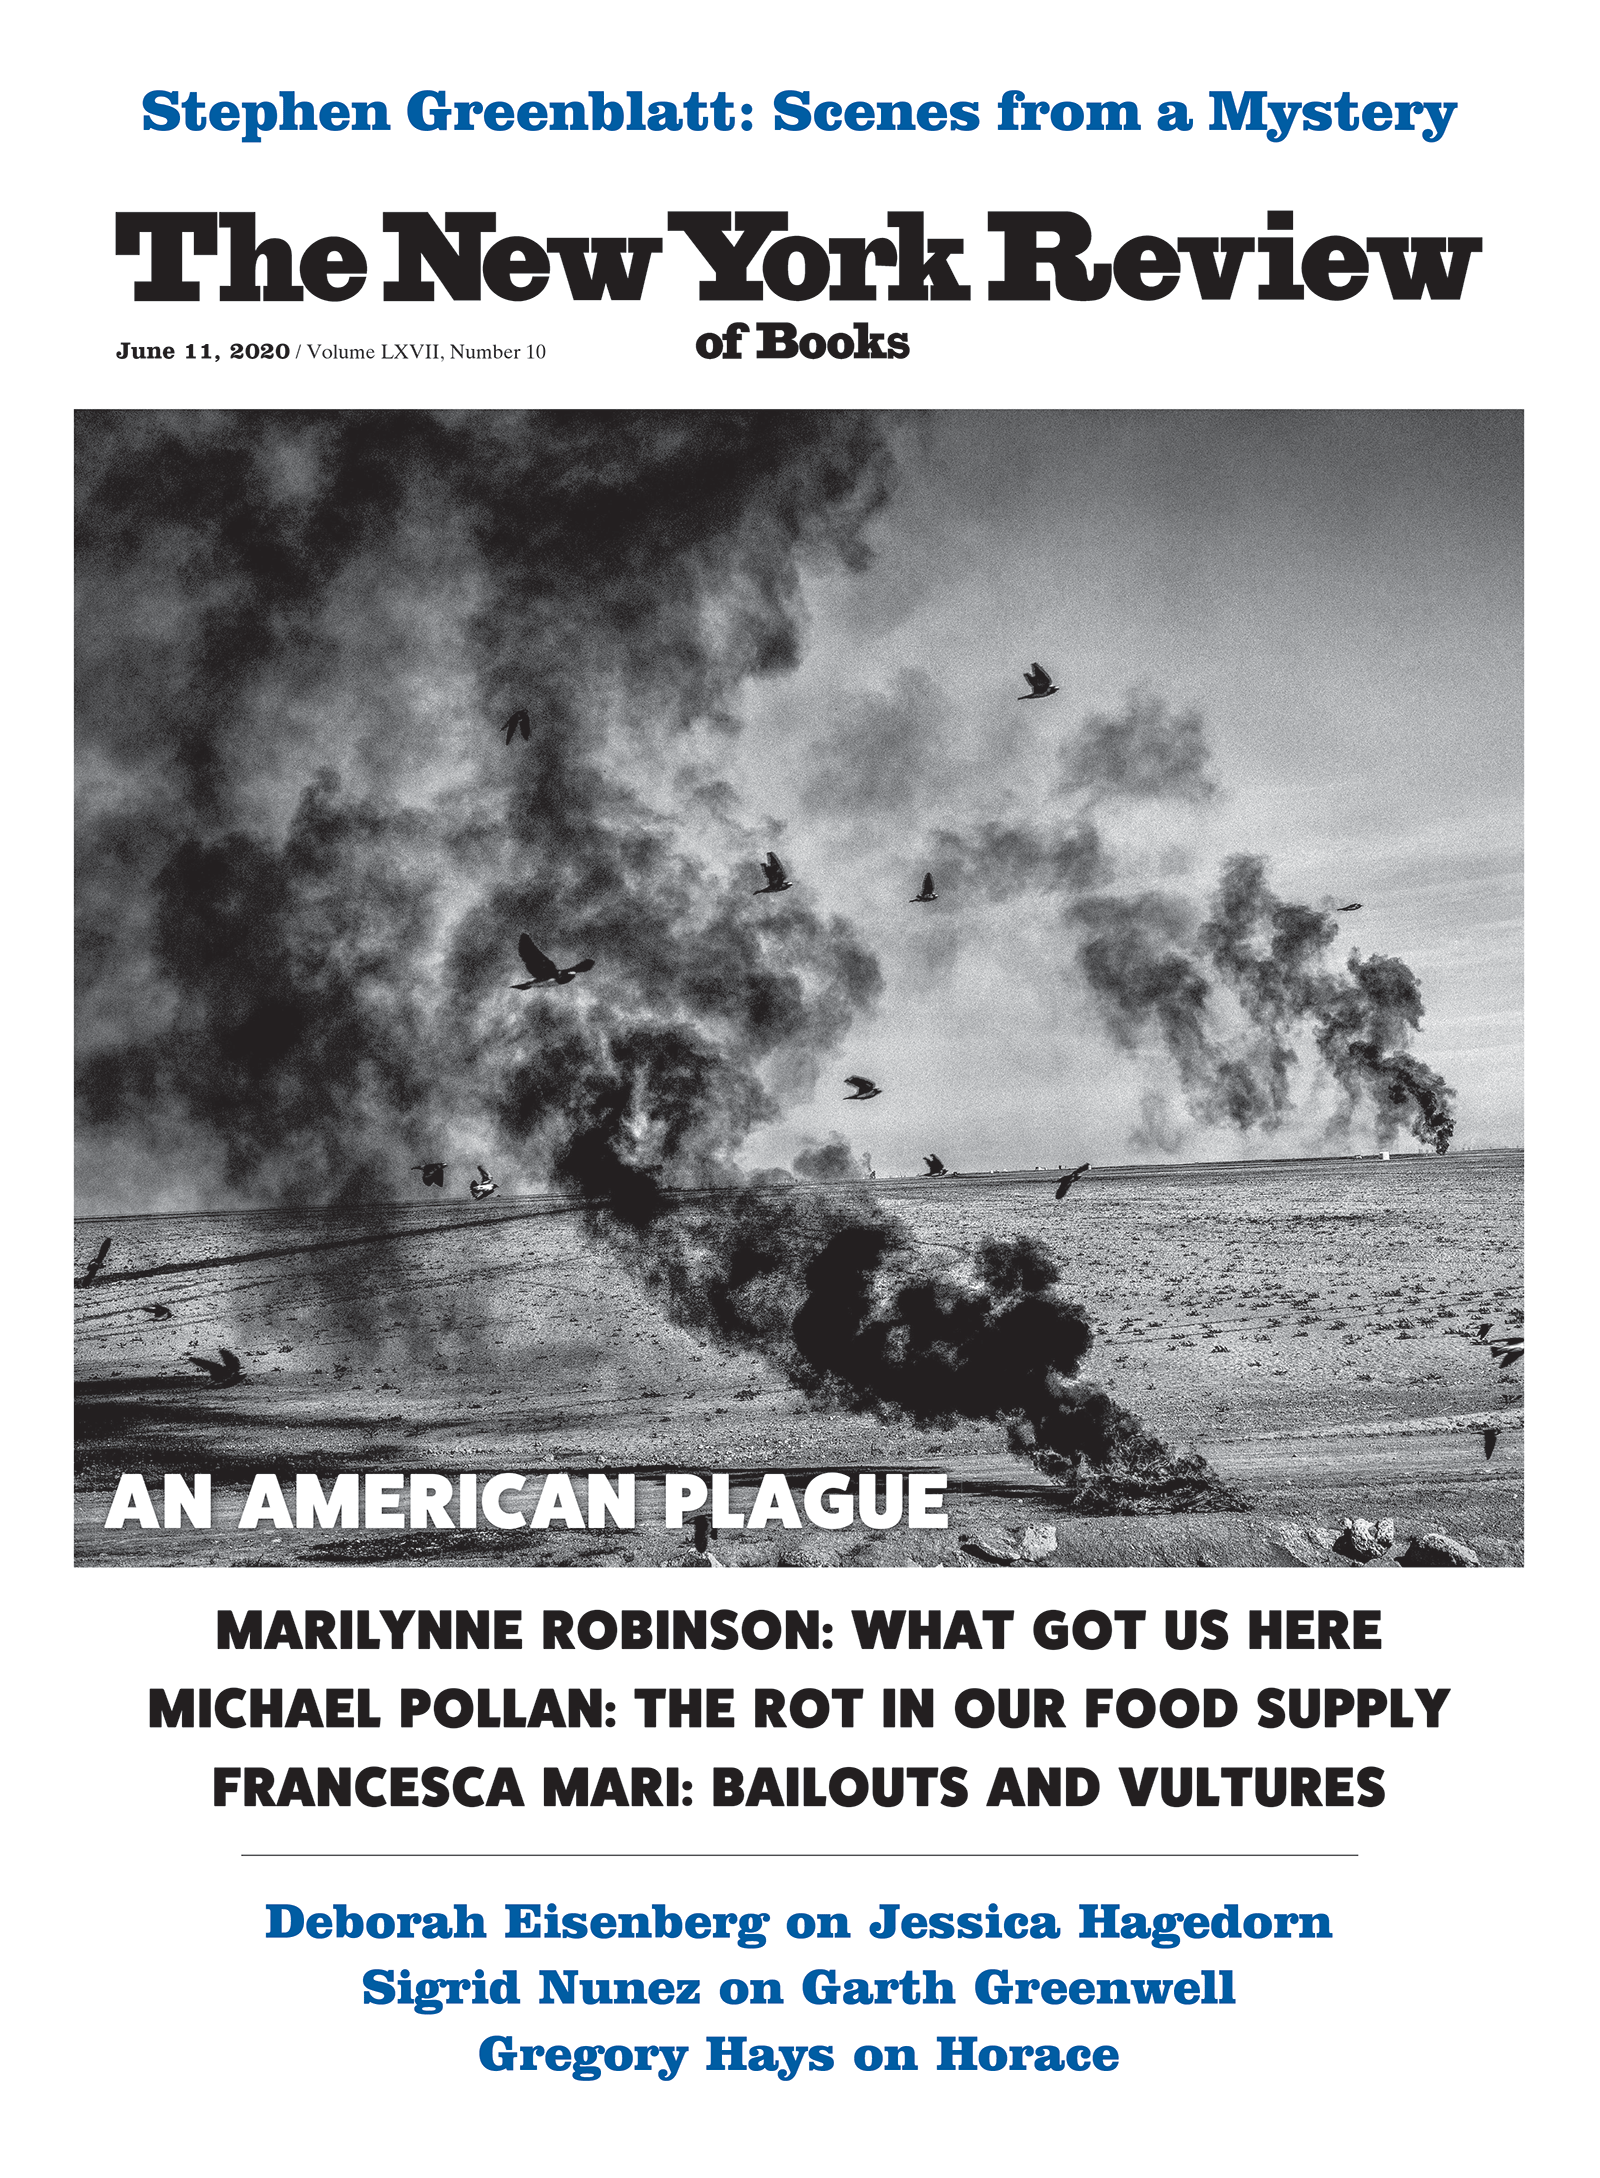 Image of the June 11, 2020 issue cover.